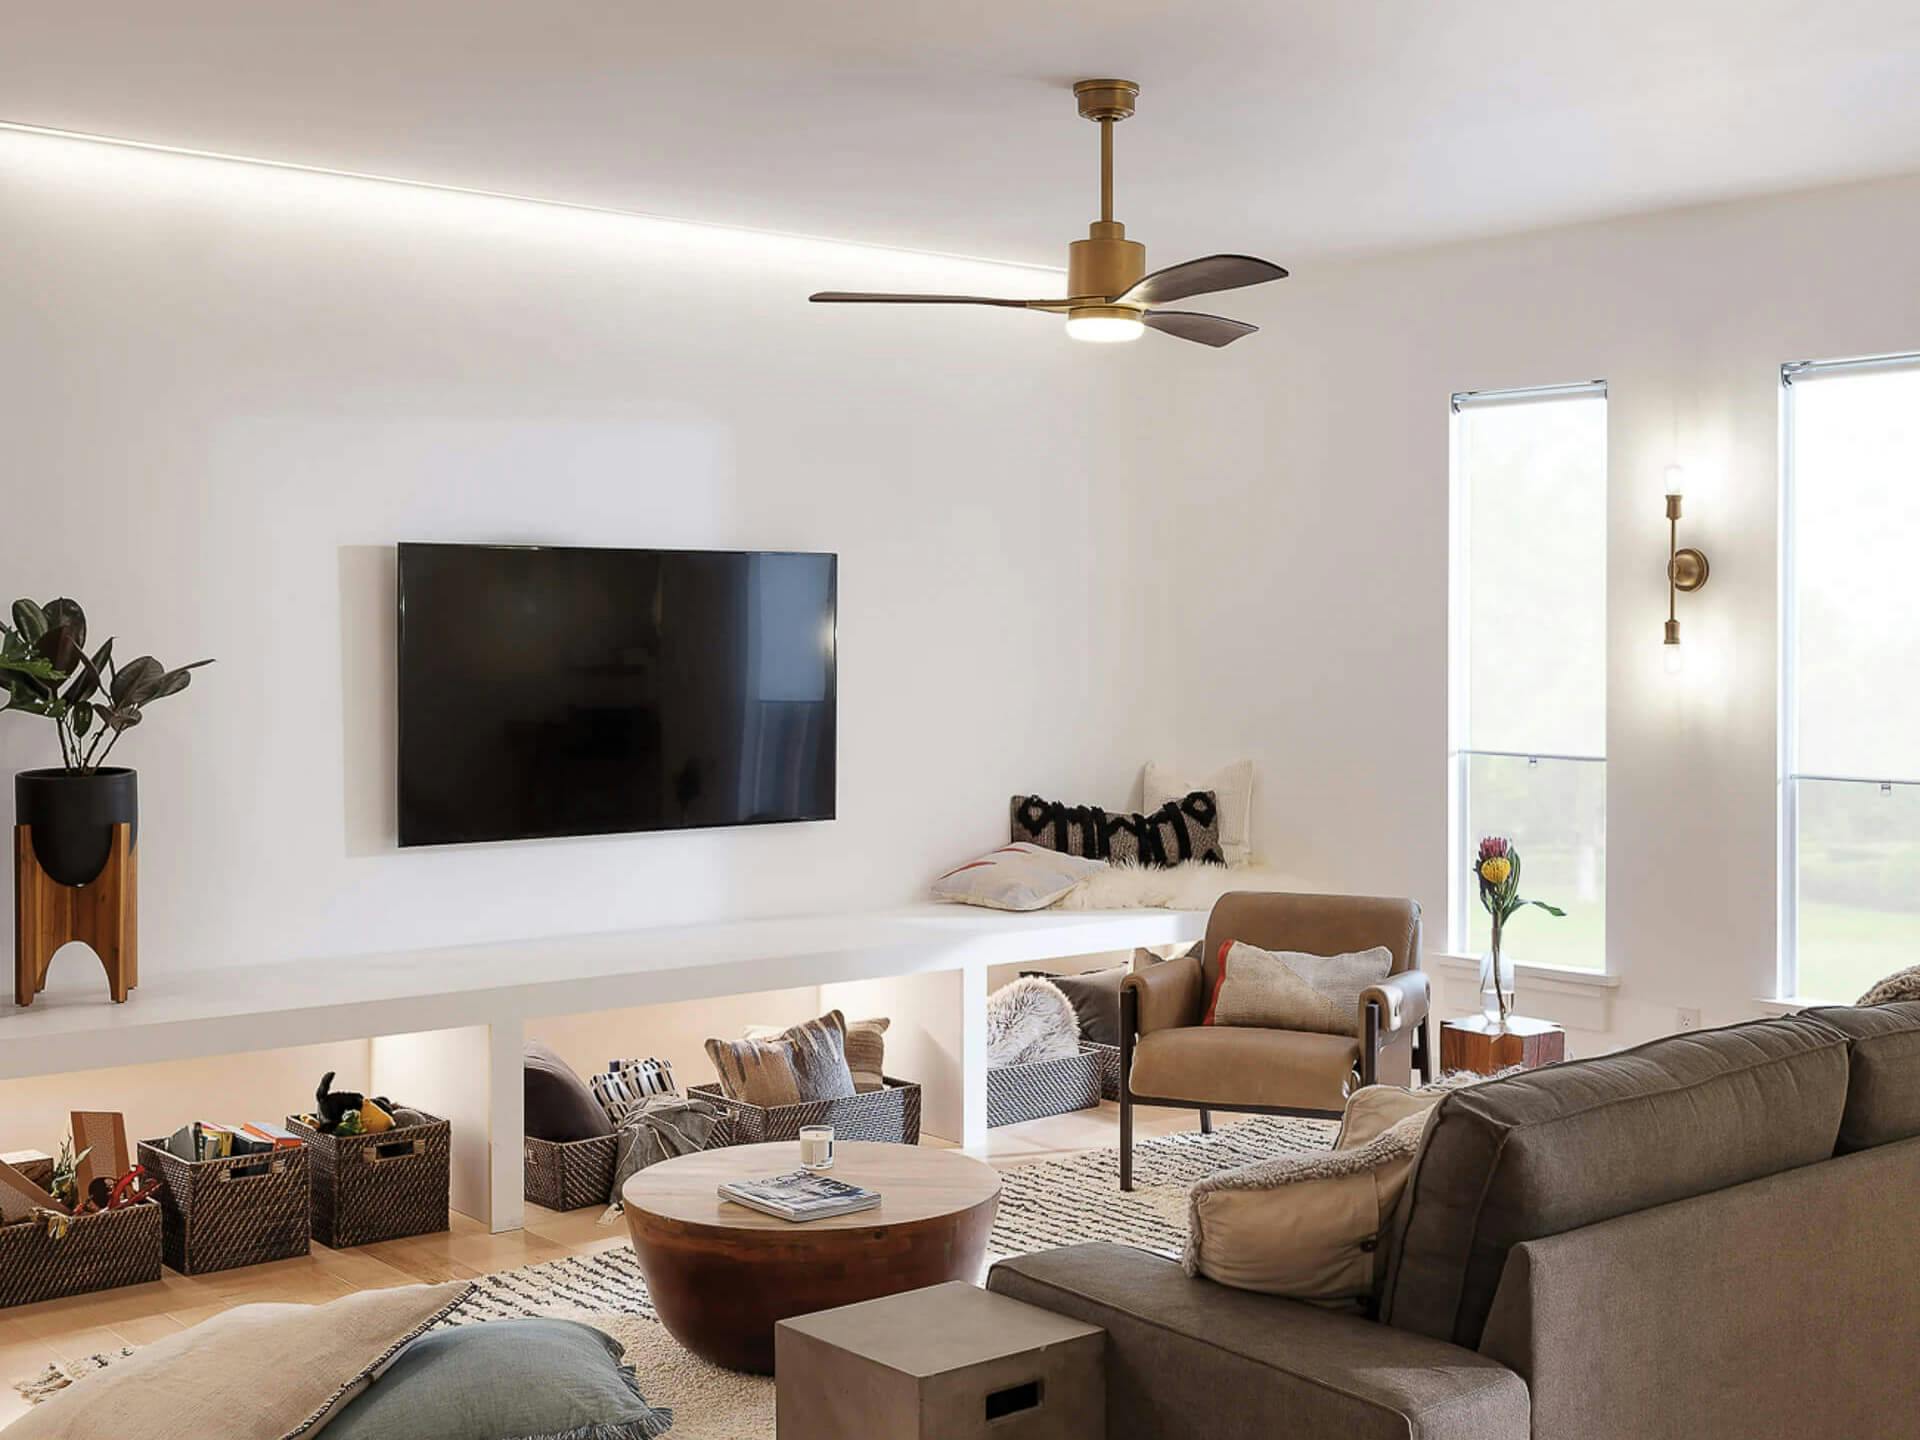 Living room accented with lighting from a Colerne ceiling fan and an Armstrong wall sconce